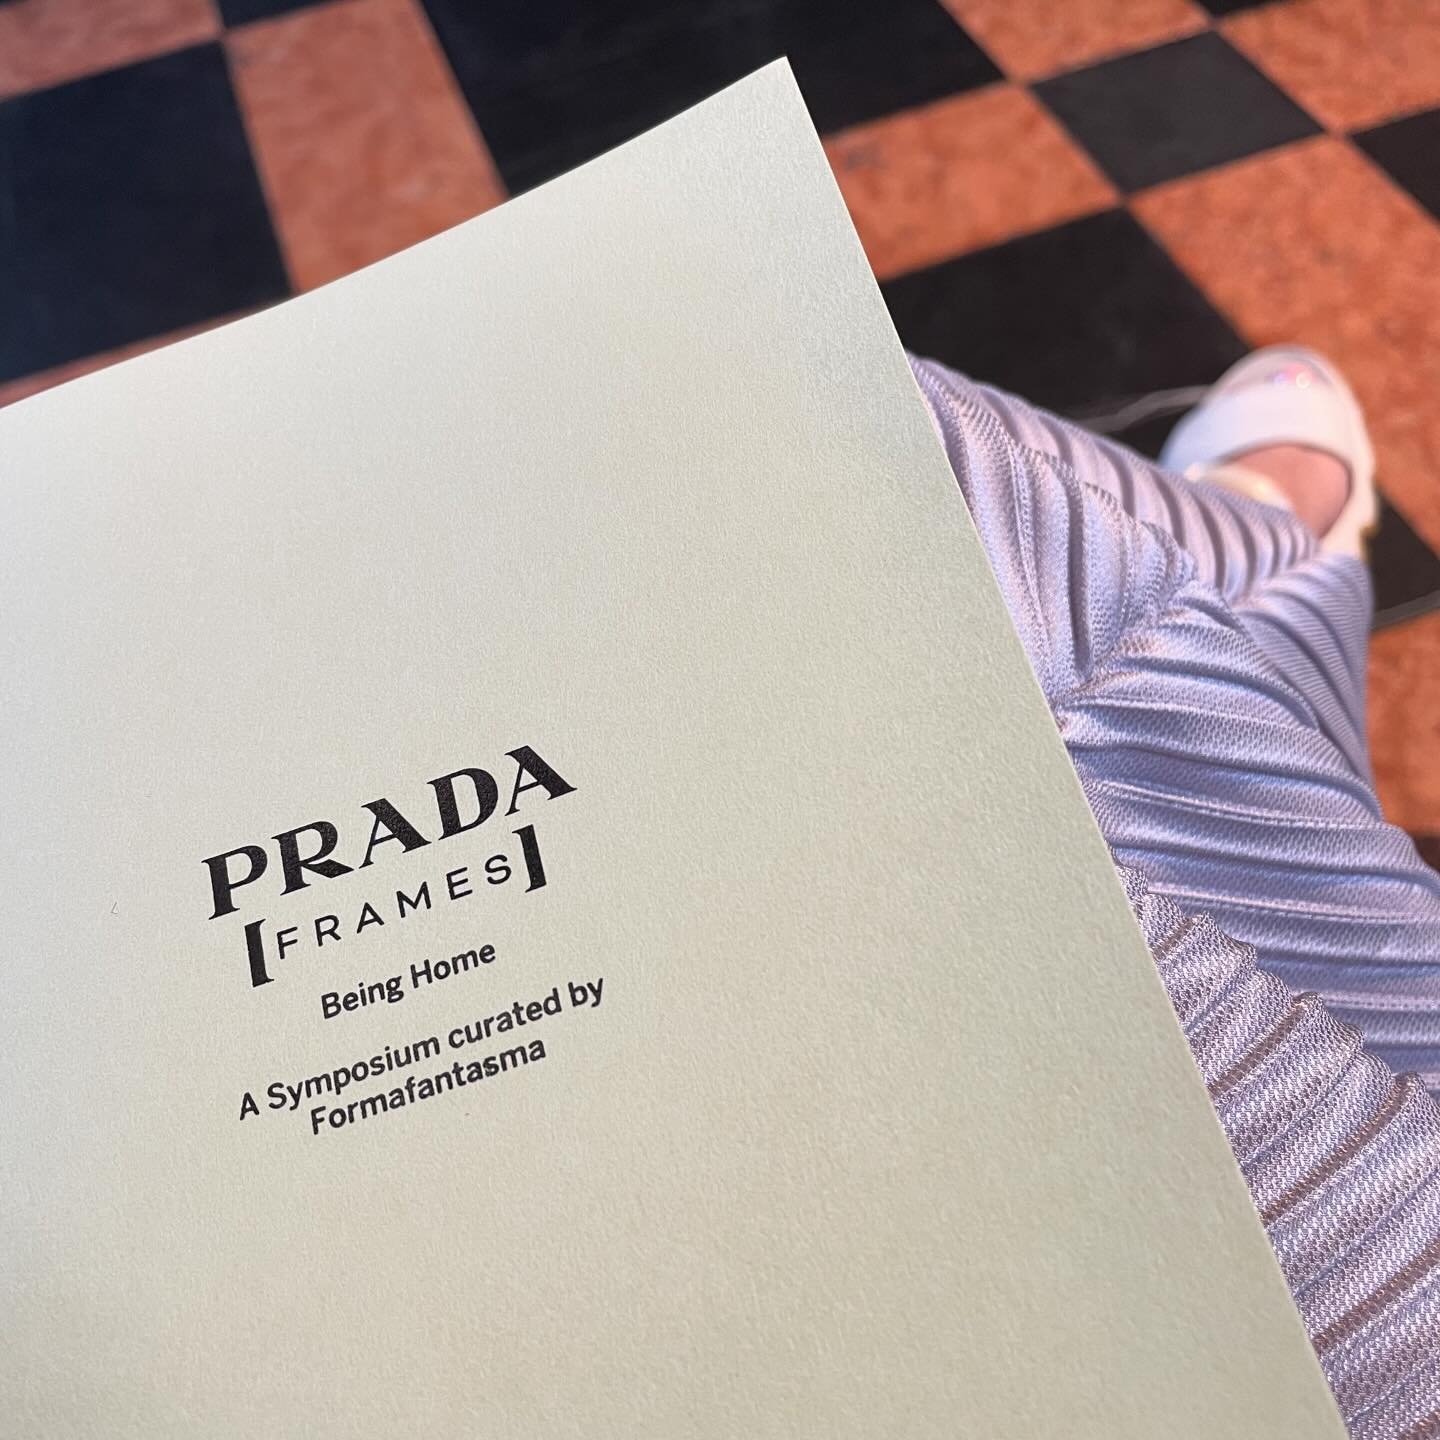 Salone Day 1.  Great start at Prada Frames - a series of talks focused on the question of what is home curated by Formafantasma.  First up a talk about the concept and history of the living room by  @alice.rawsthorn @paolantonelli @wig56 and @david_v